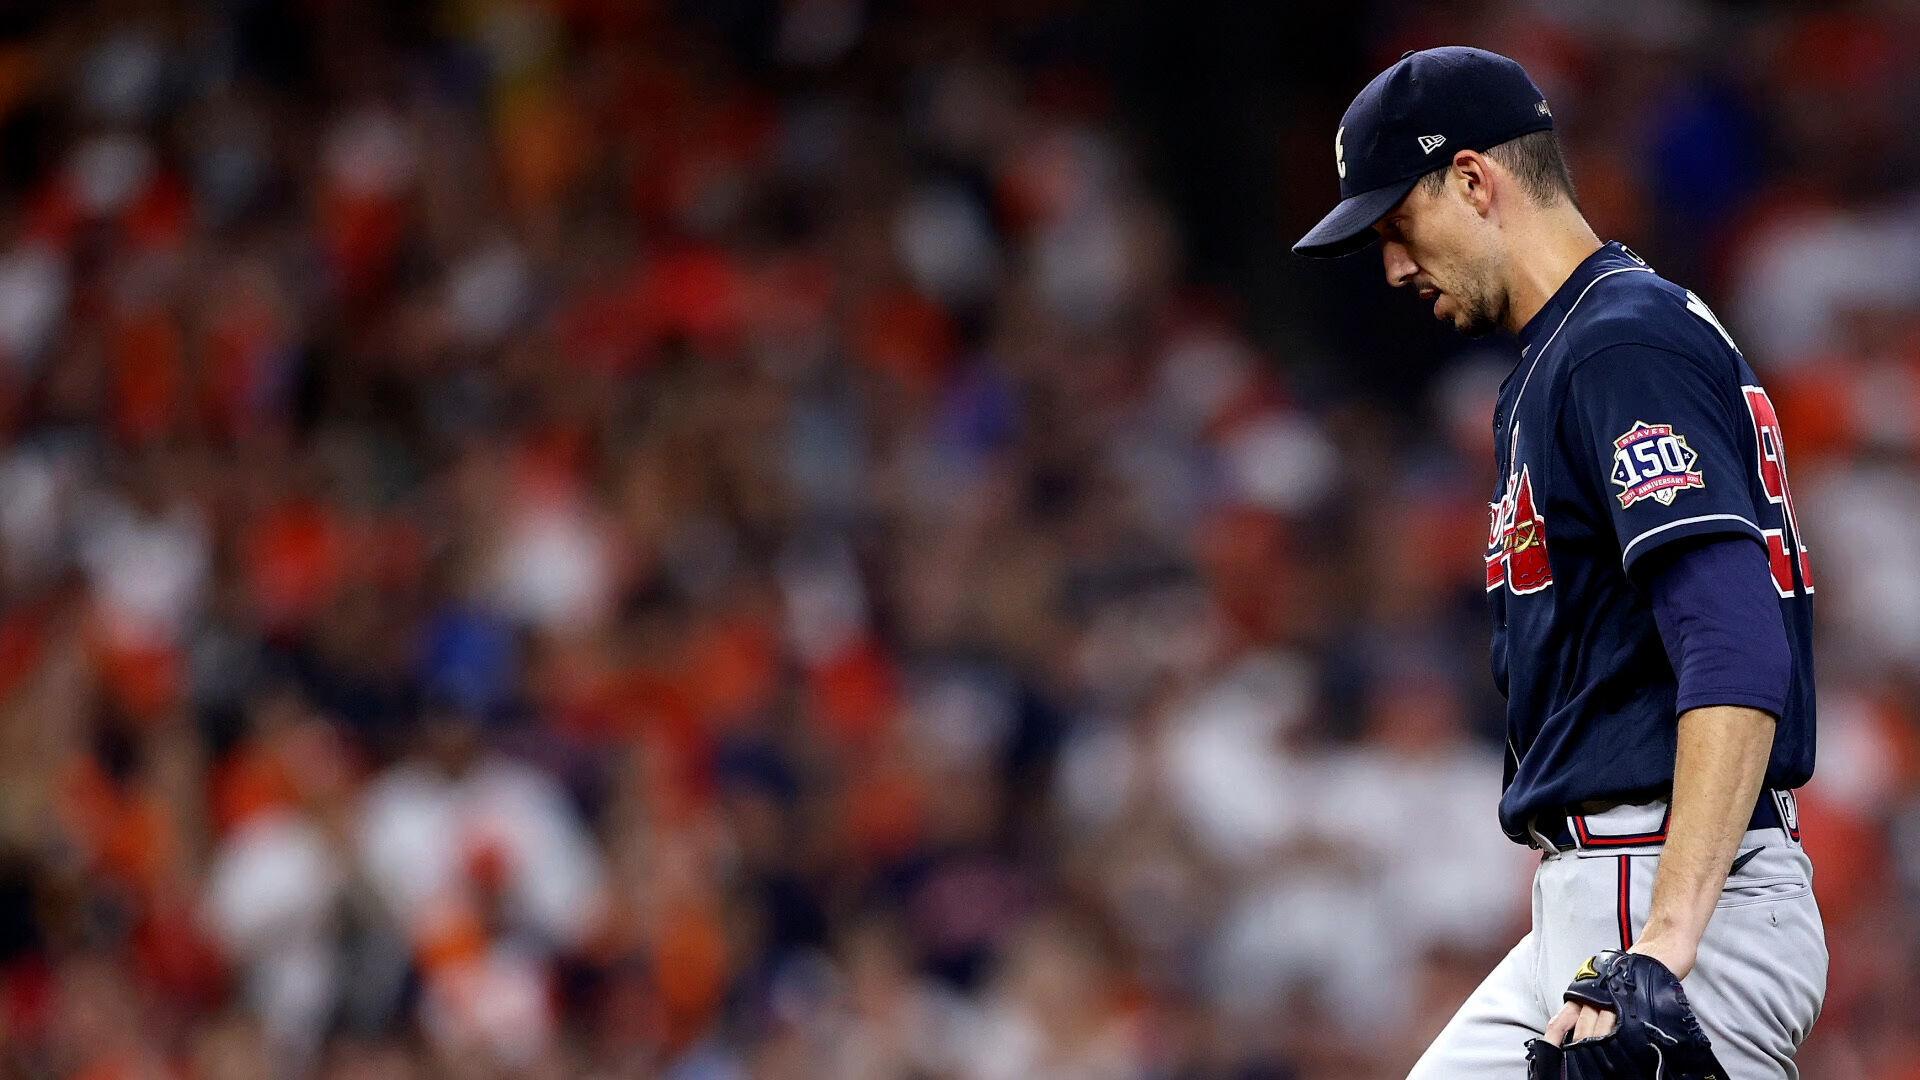 Braves pitcher Charlie Morton fractures bone in his leg, leaves